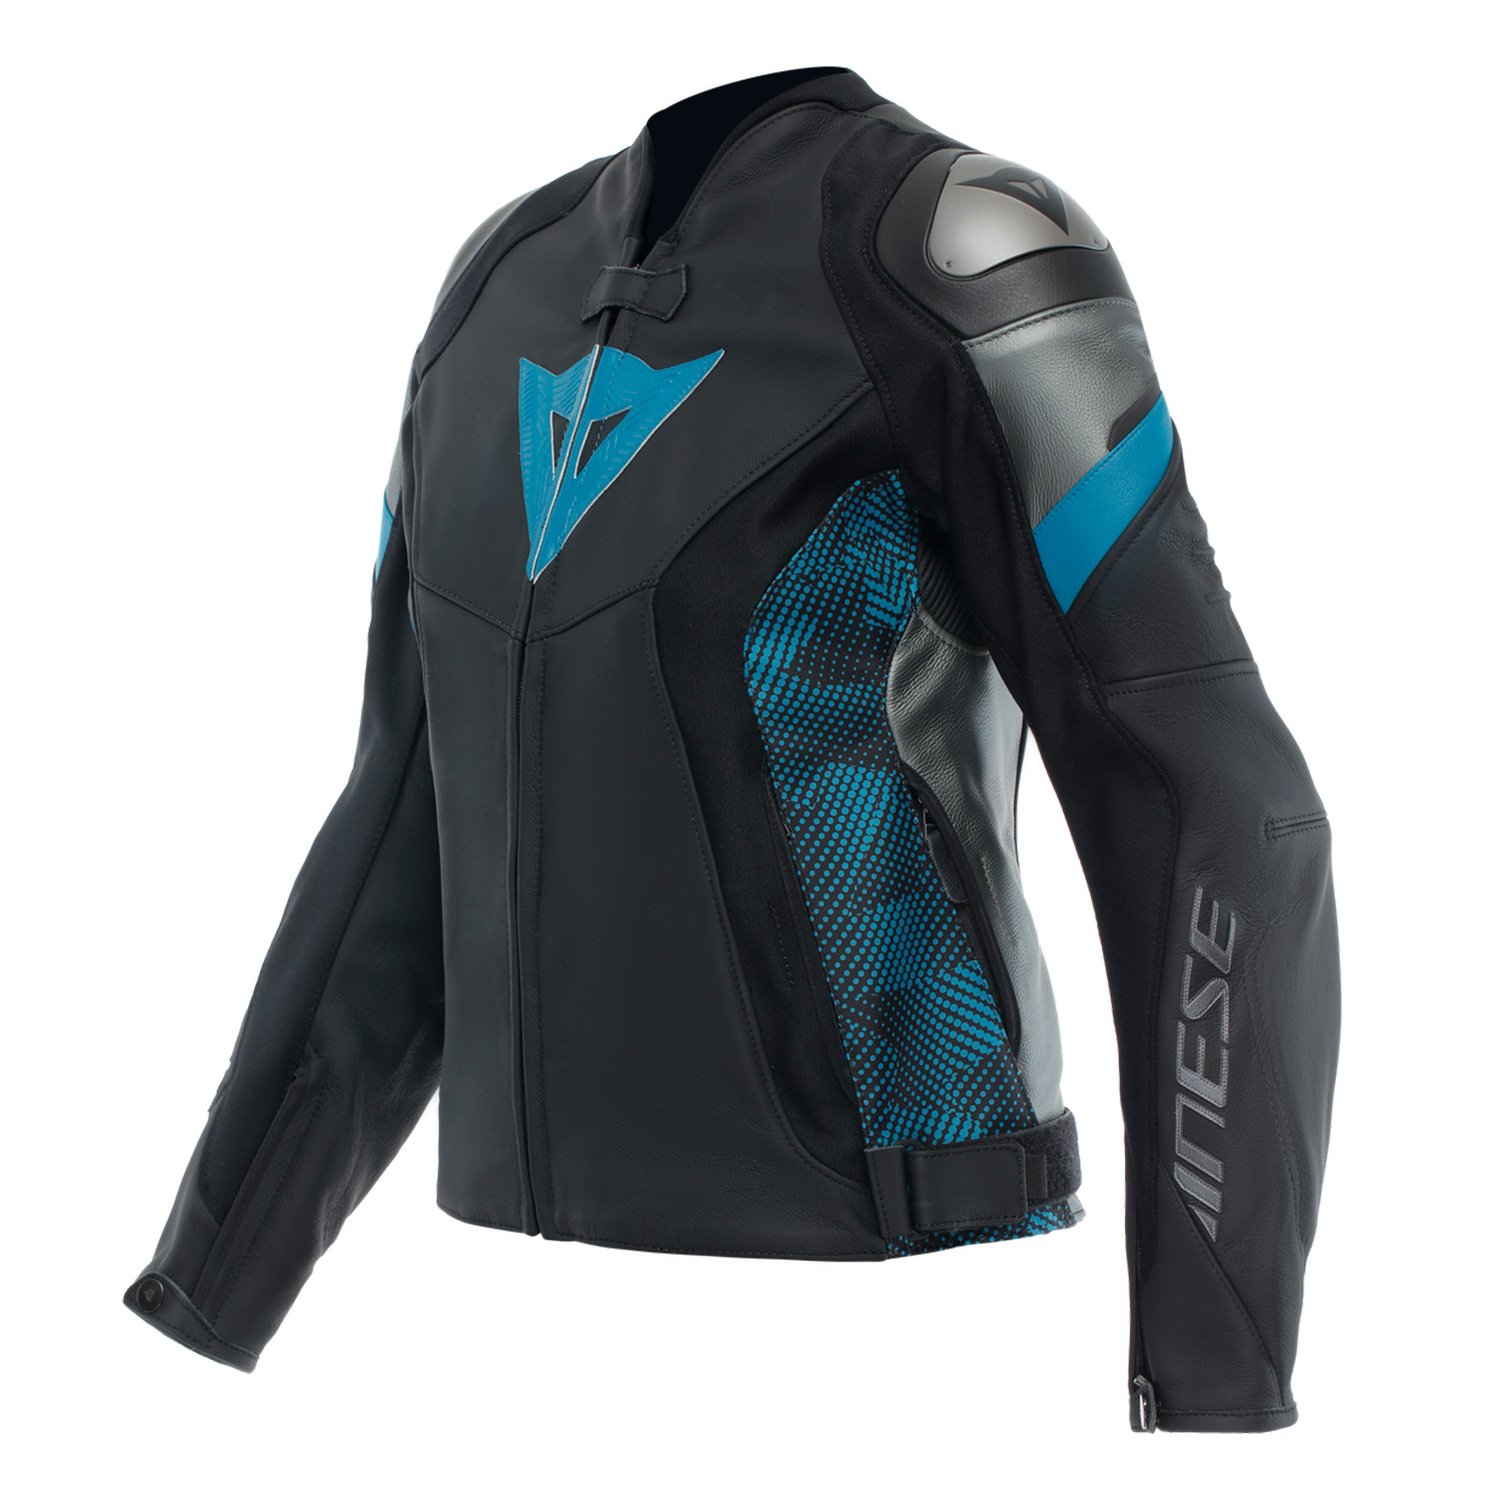 Image of Dainese Avro 5 Leather Jacket WMN Black Teal Anthracite Size 38 EN